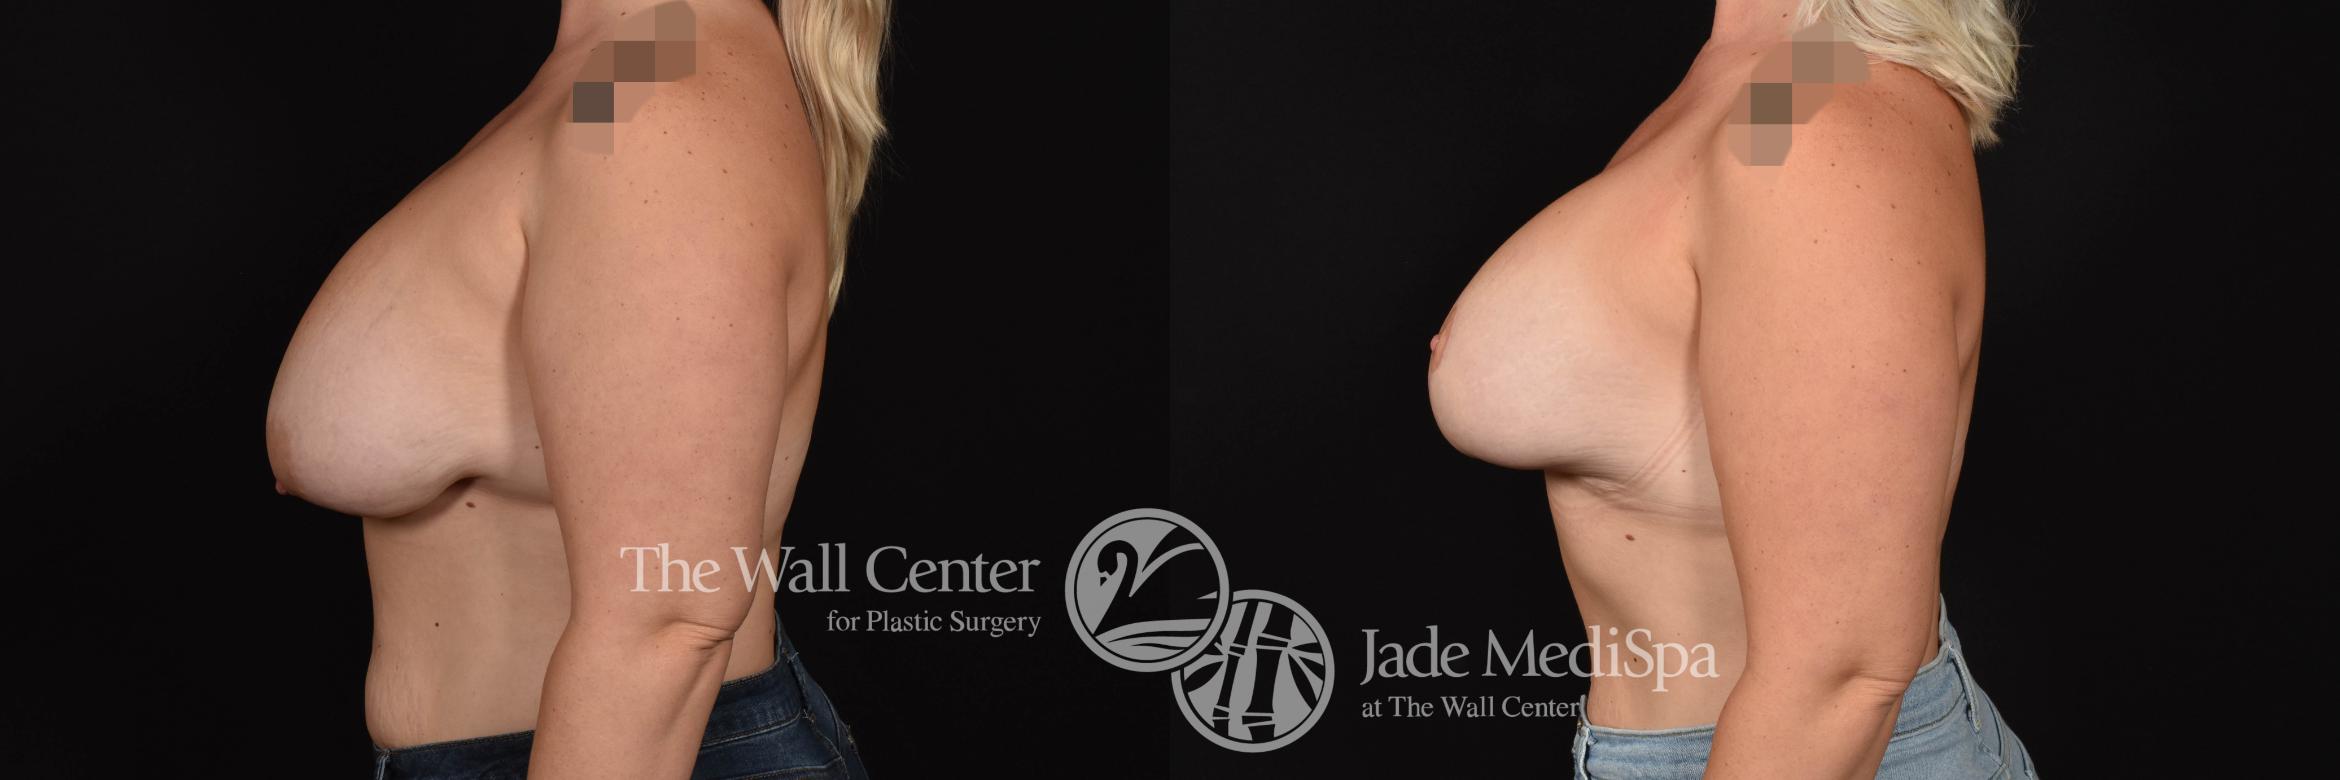 Breast Implant Exchange Left Side Photo, Shreveport, Louisiana, The Wall Center for Plastic Surgery, Case 915